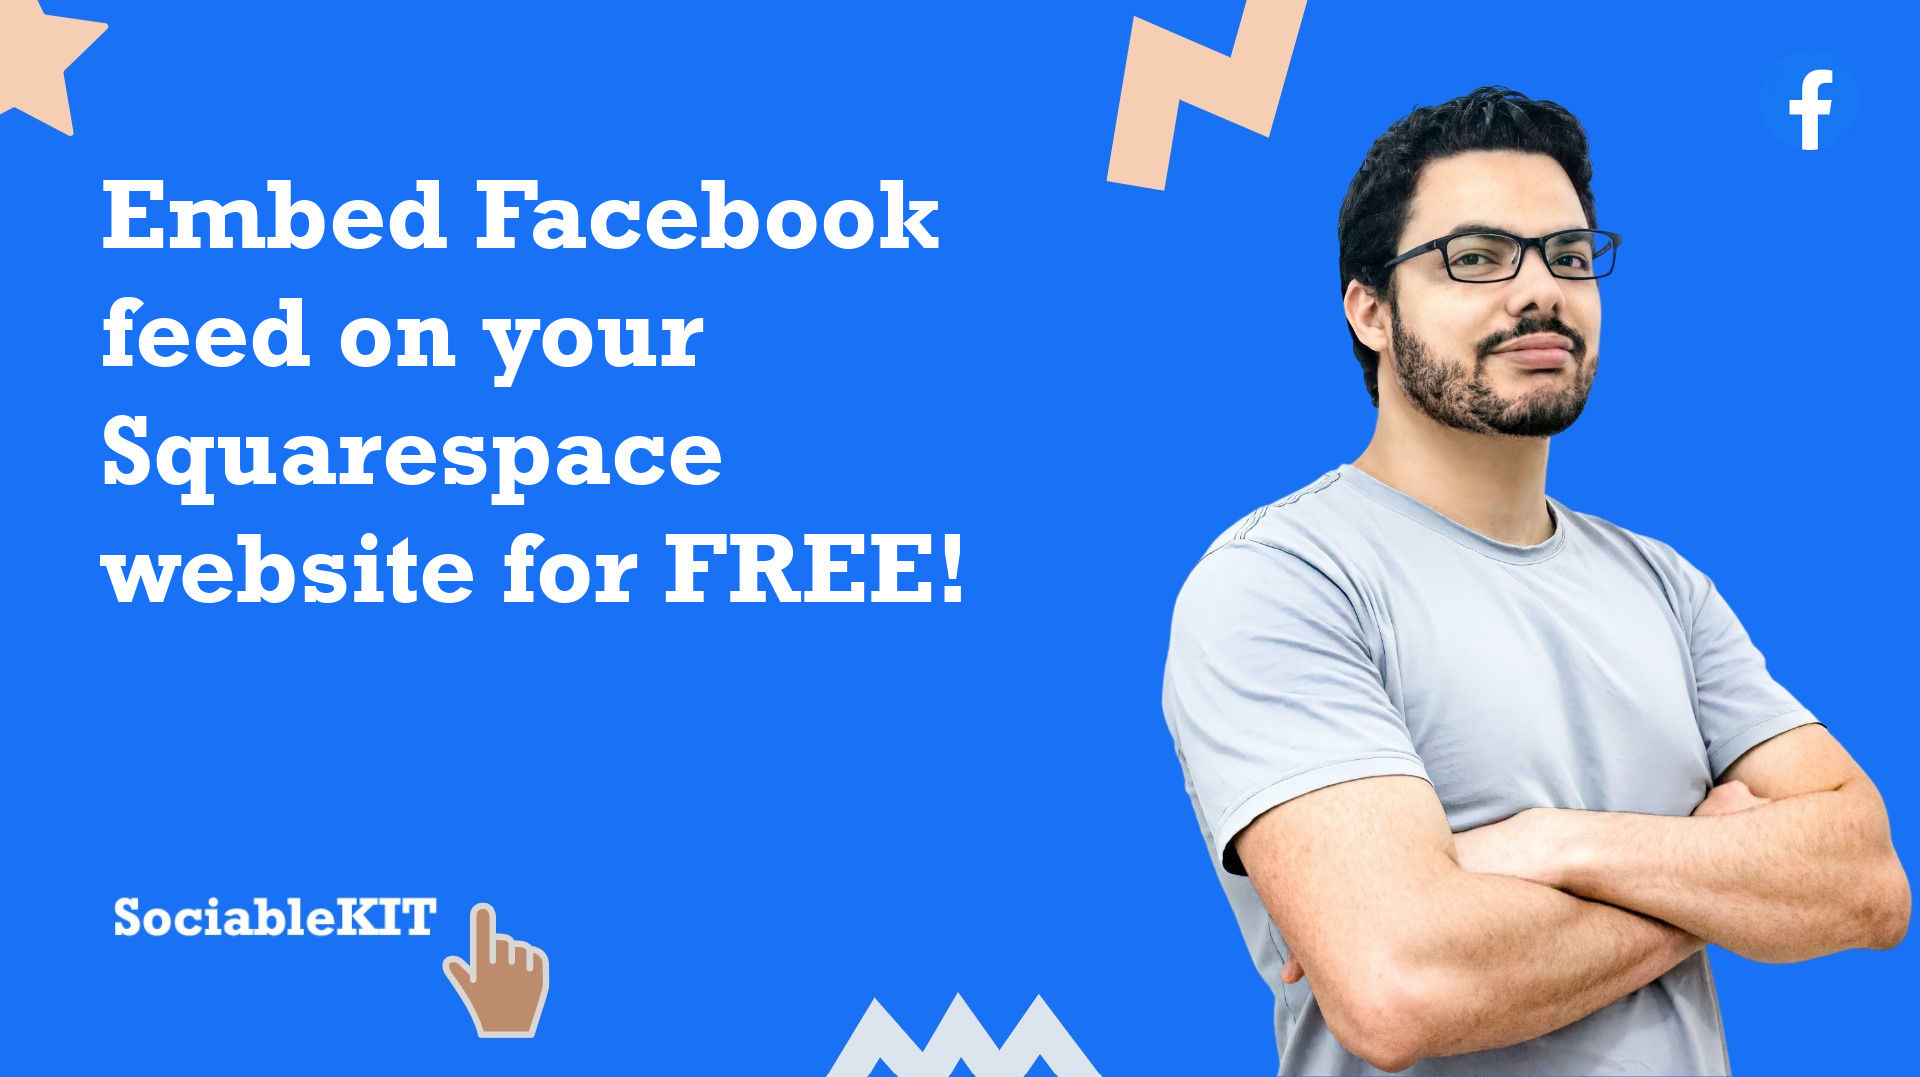 How to embed Facebook feed on your Squarespace website for FREE?